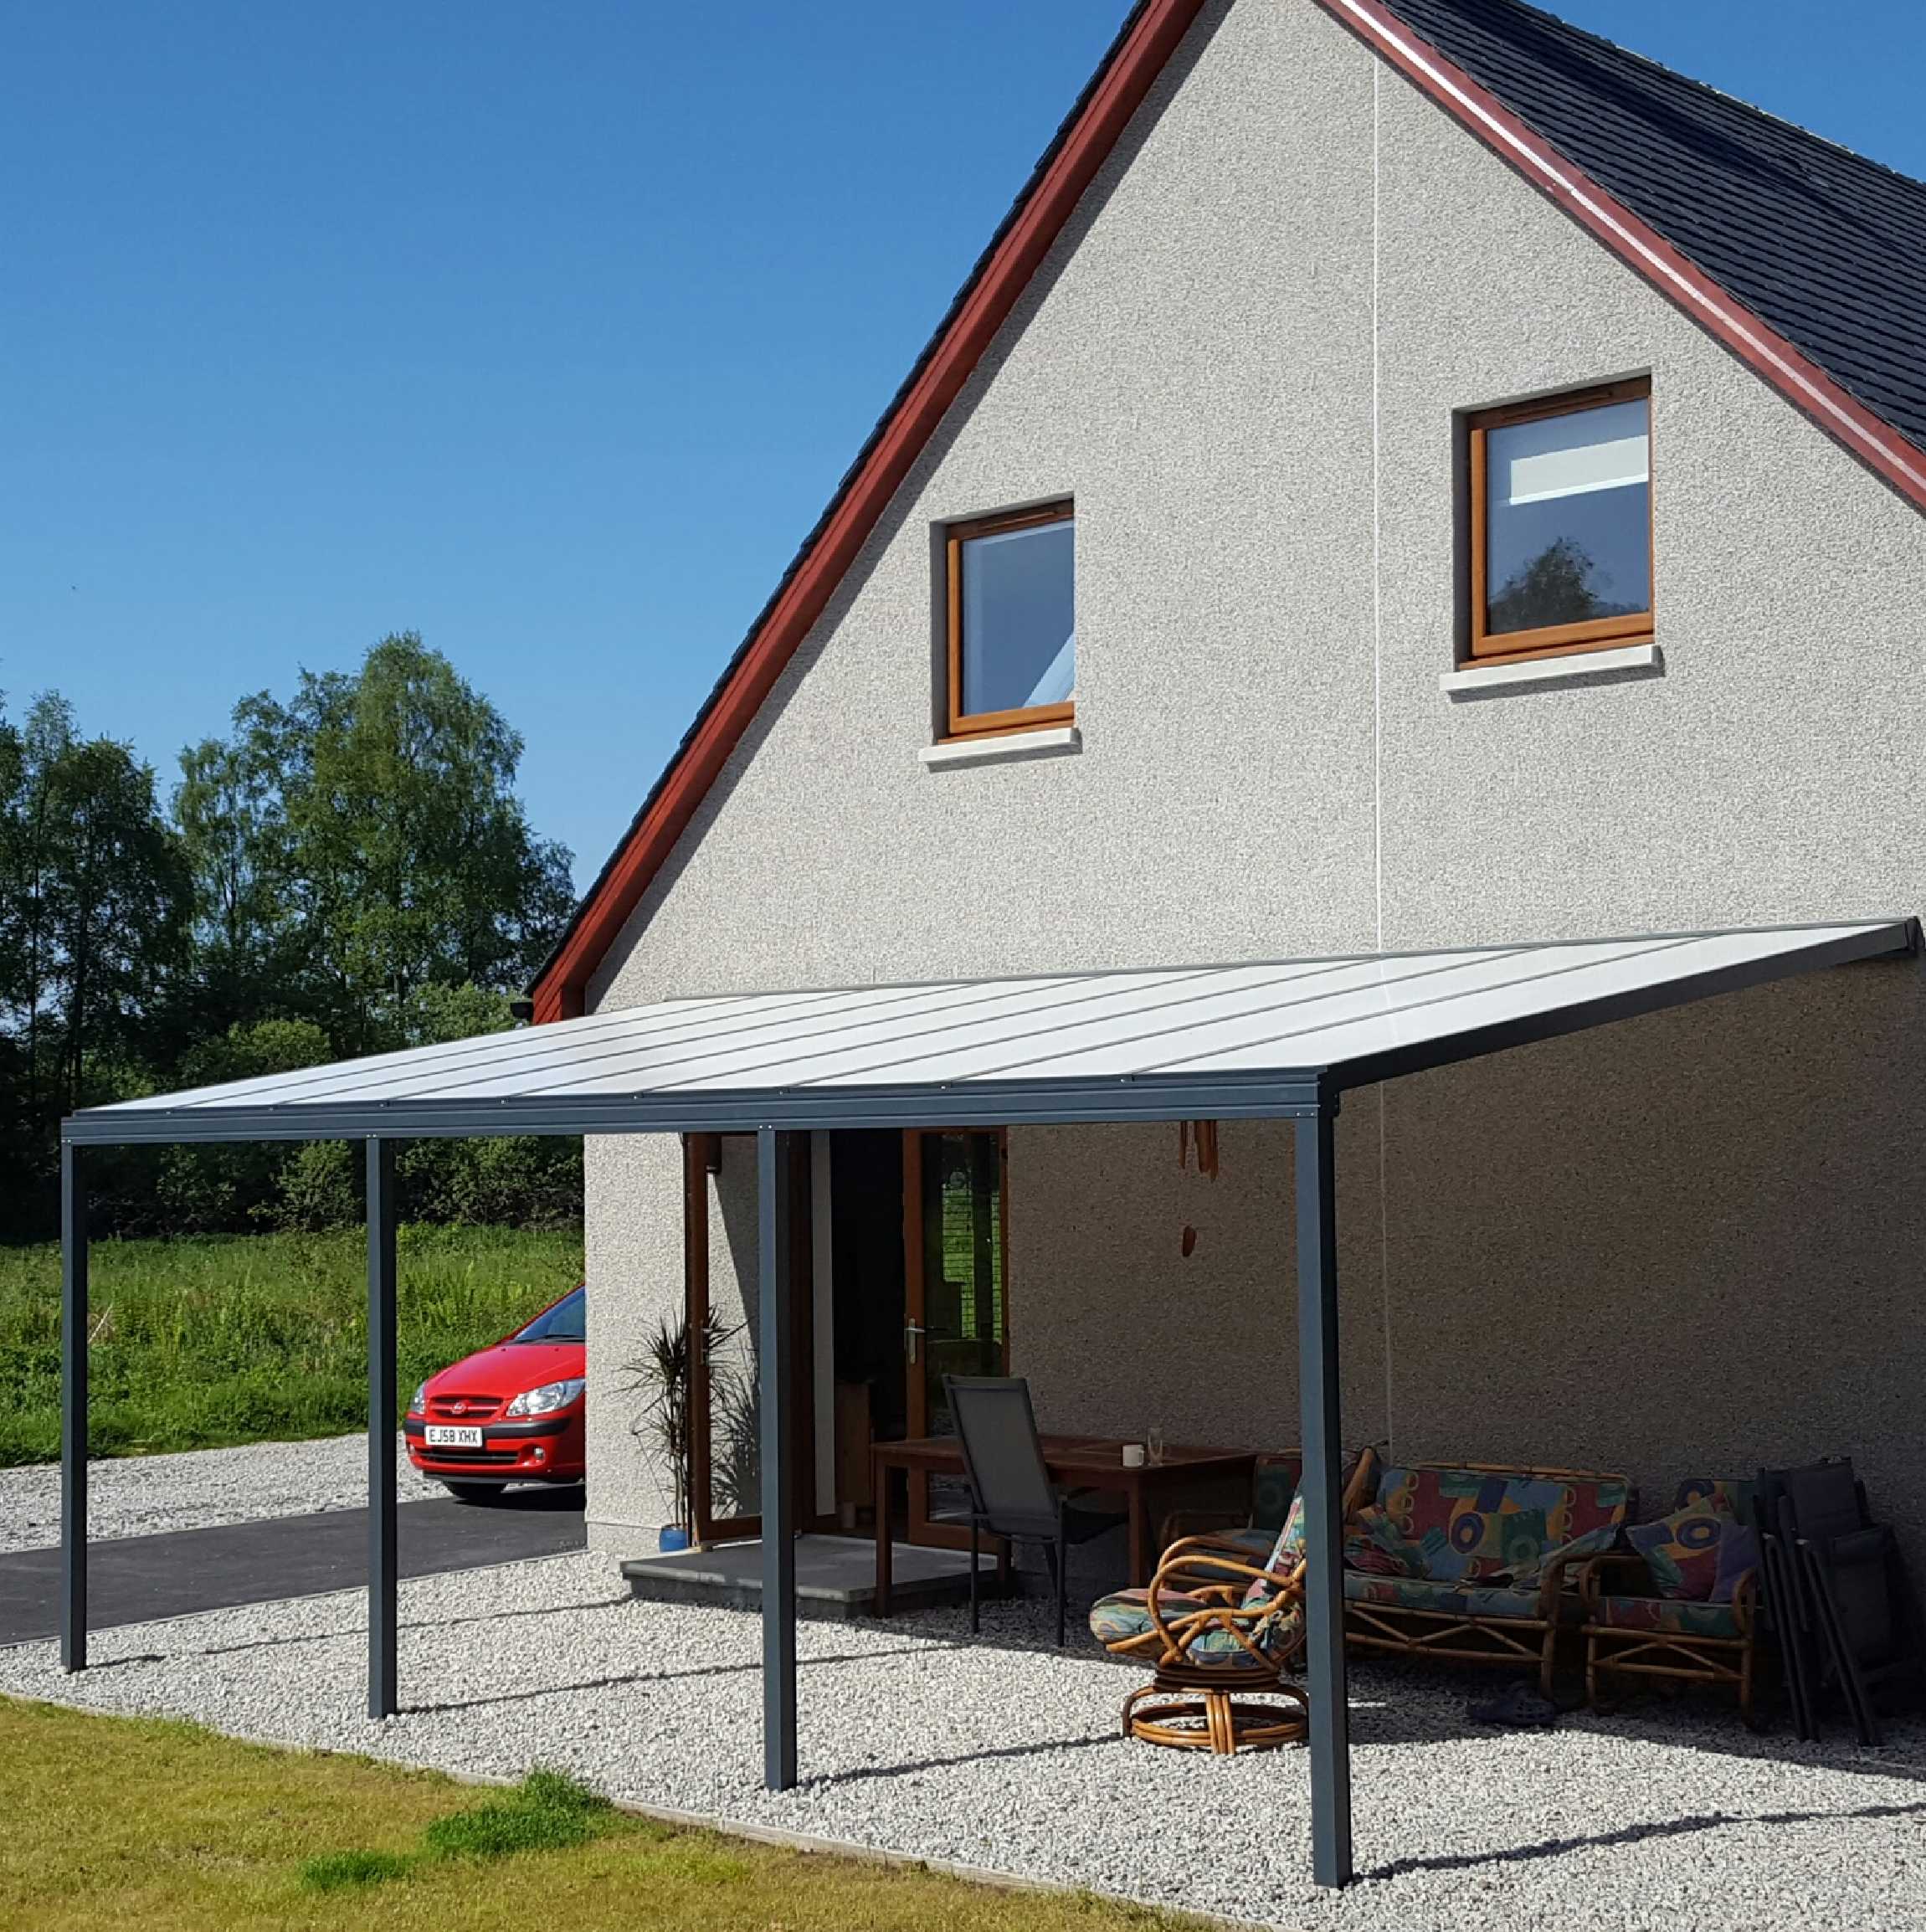 Great selection of Omega Smart Lean-To Canopy, Anthracite Grey, 16mm Polycarbonate Glazing - 9.5m (W) x 2.5m (P), (5) Supporting Posts